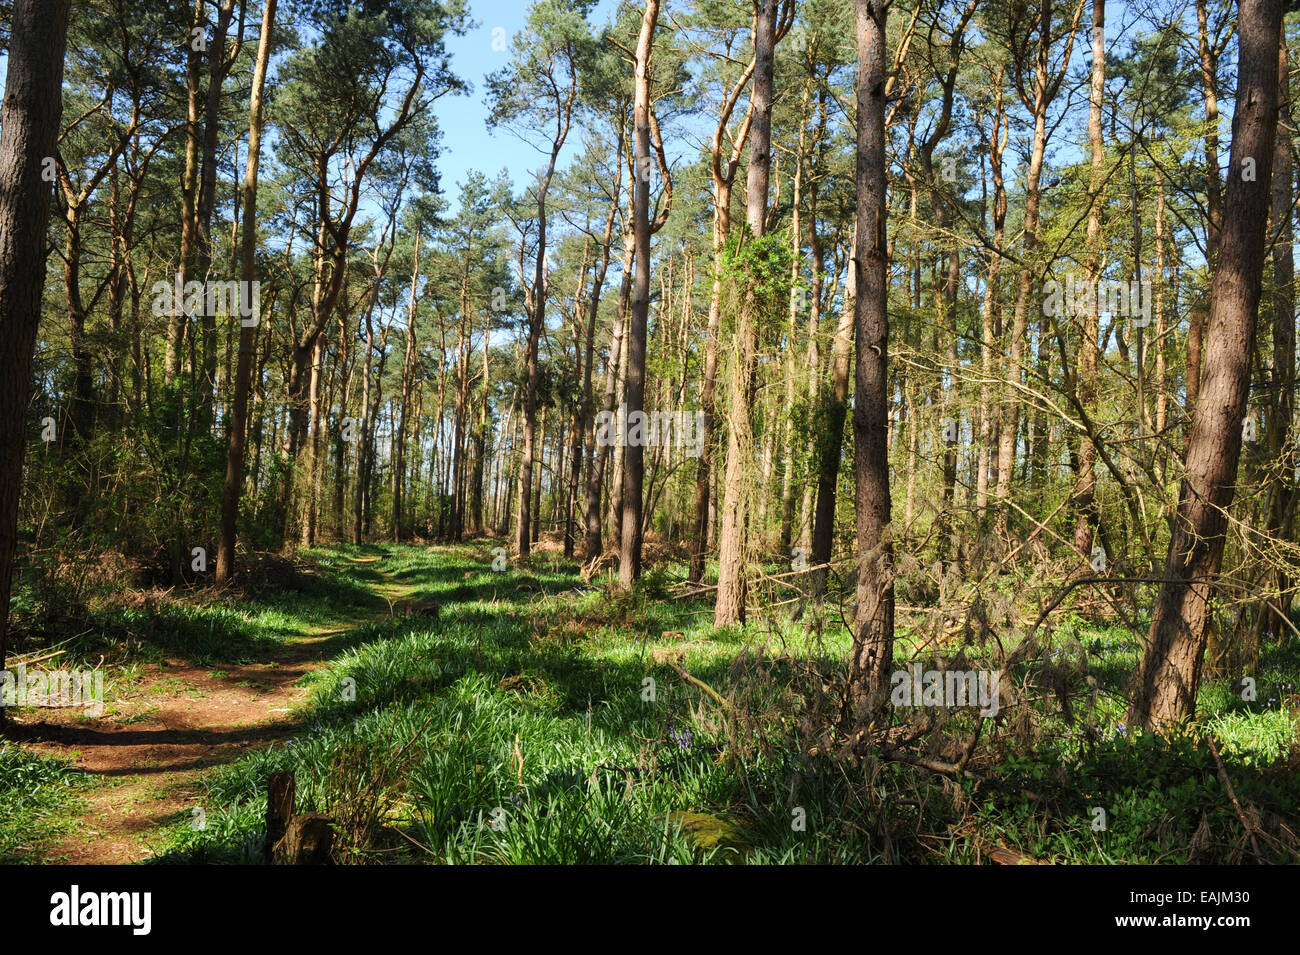 Oakley wood stock photography and images -